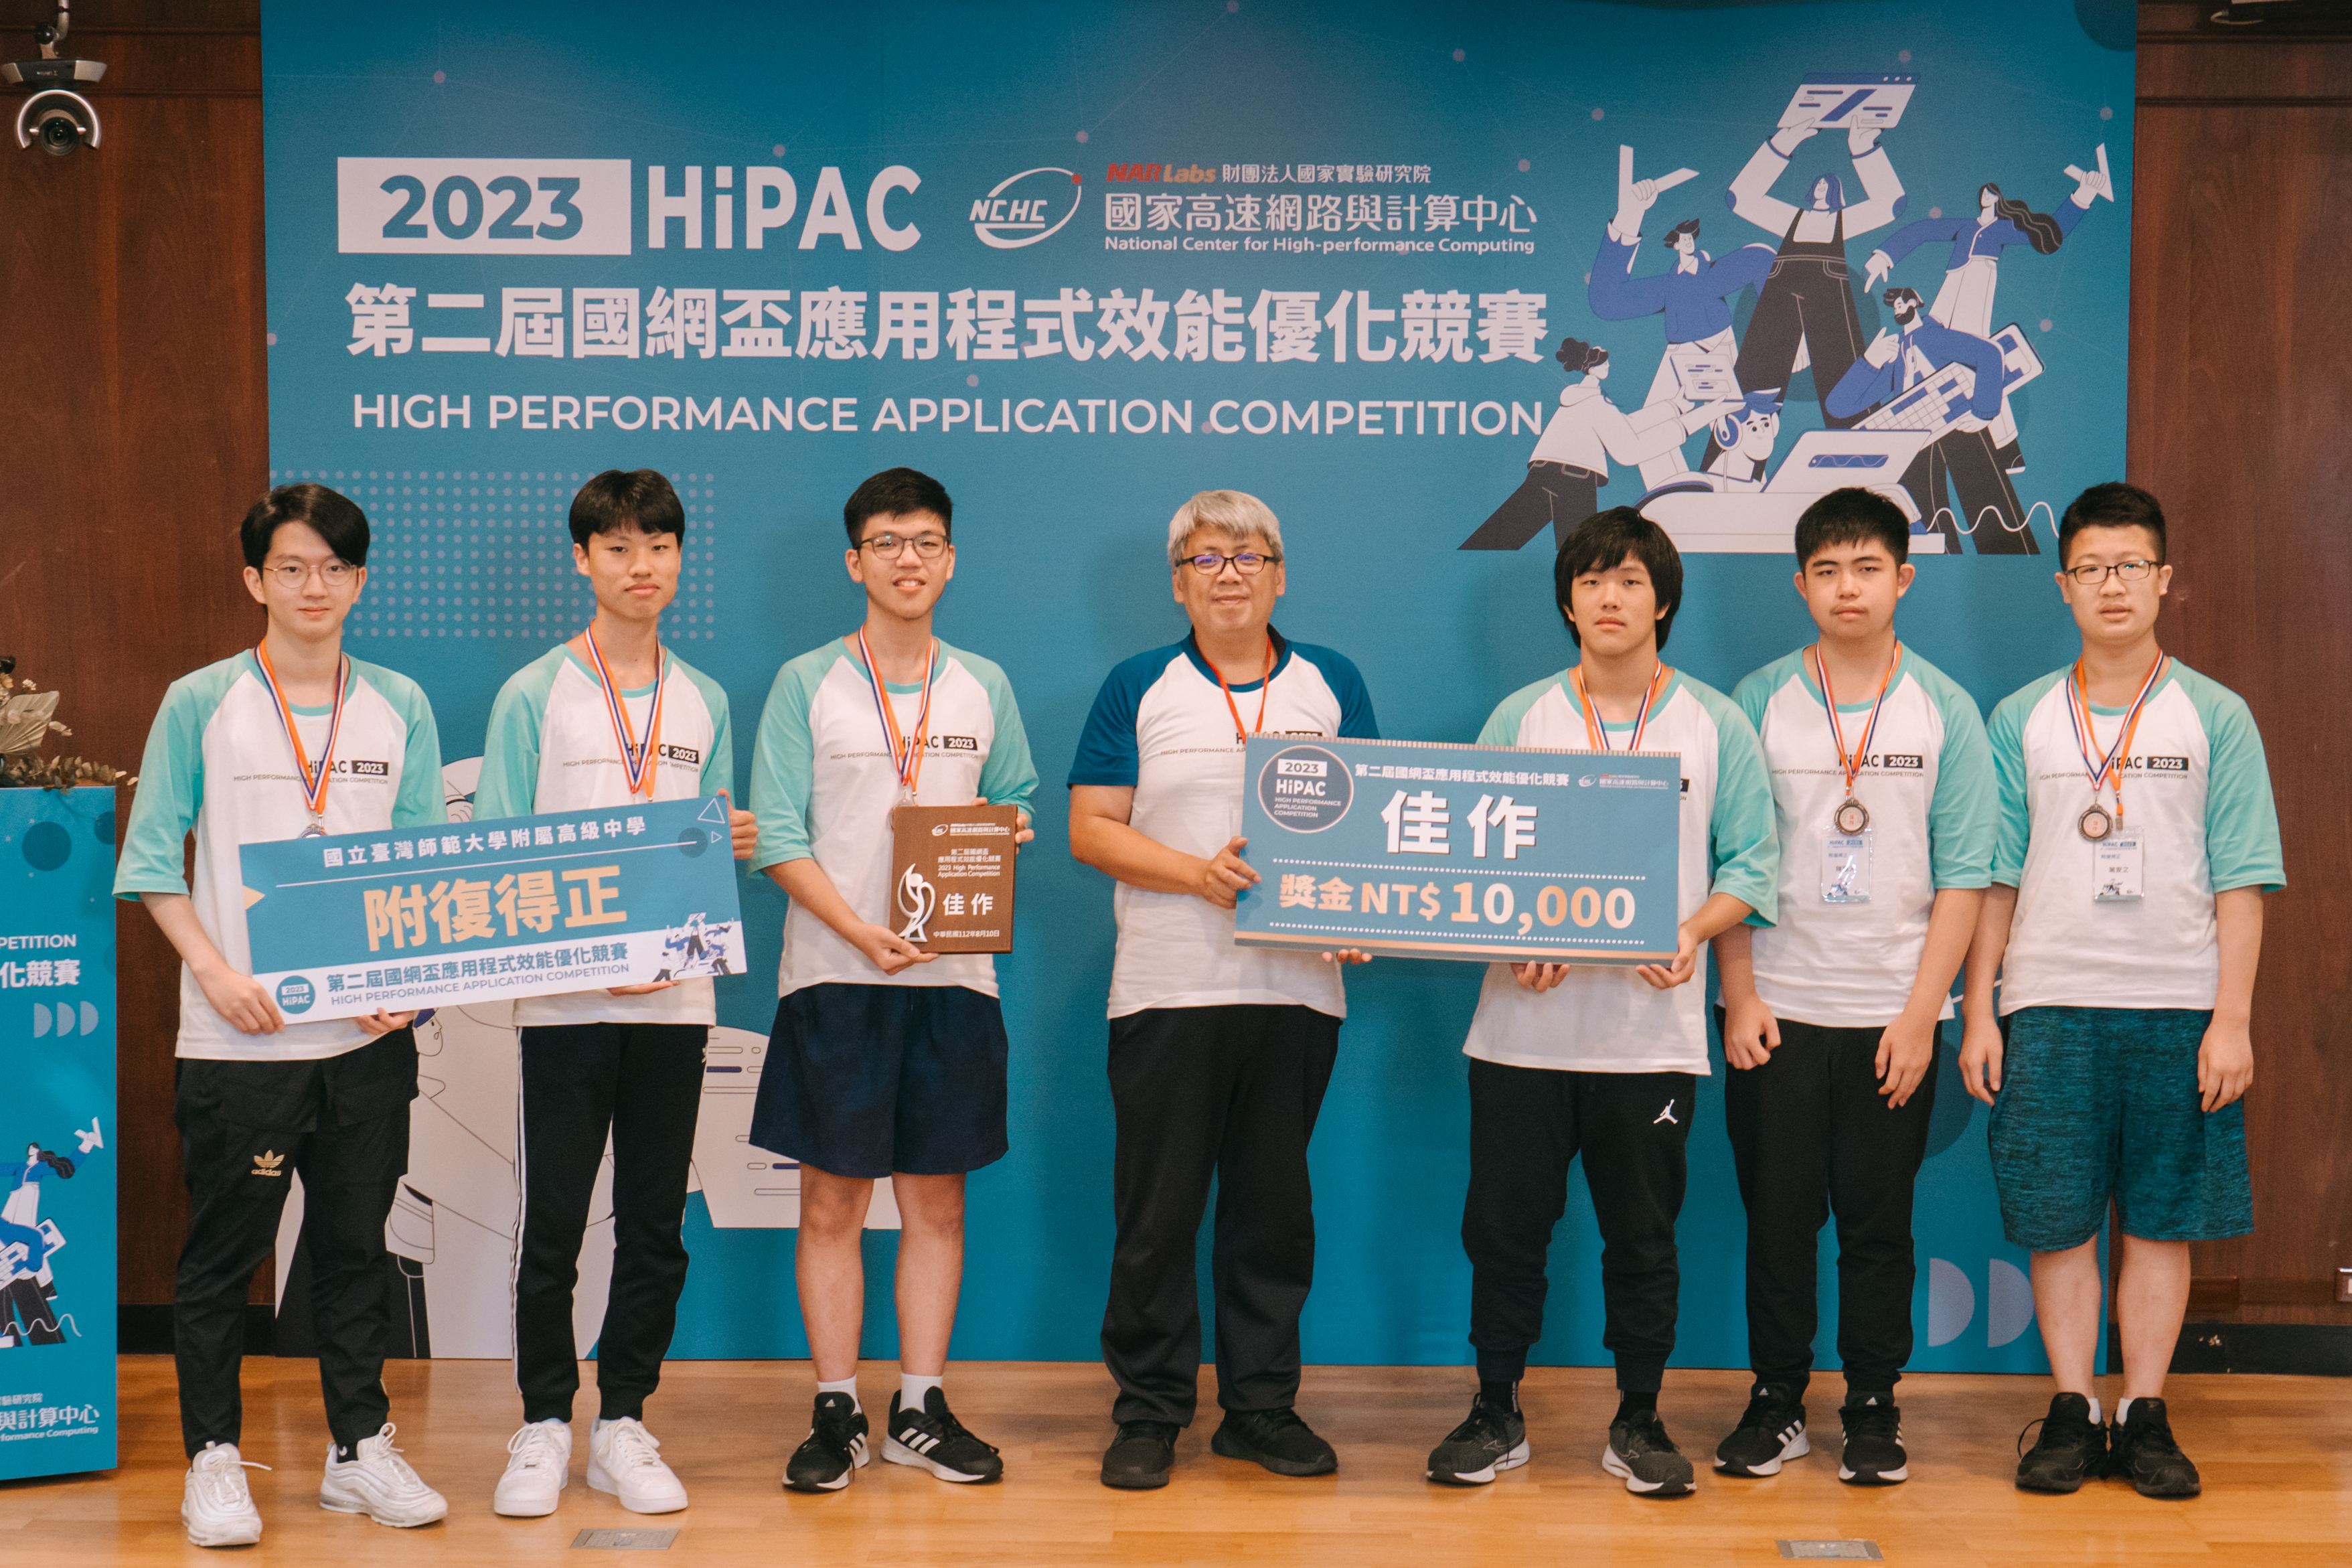 Professor Lin Chun-Yuan from the Department of Computer Science and Information Engineering of Asia University presented an honorable mention award to the Affiliated High School of National Normal University and Fuxing Experimental High School Joint Team.